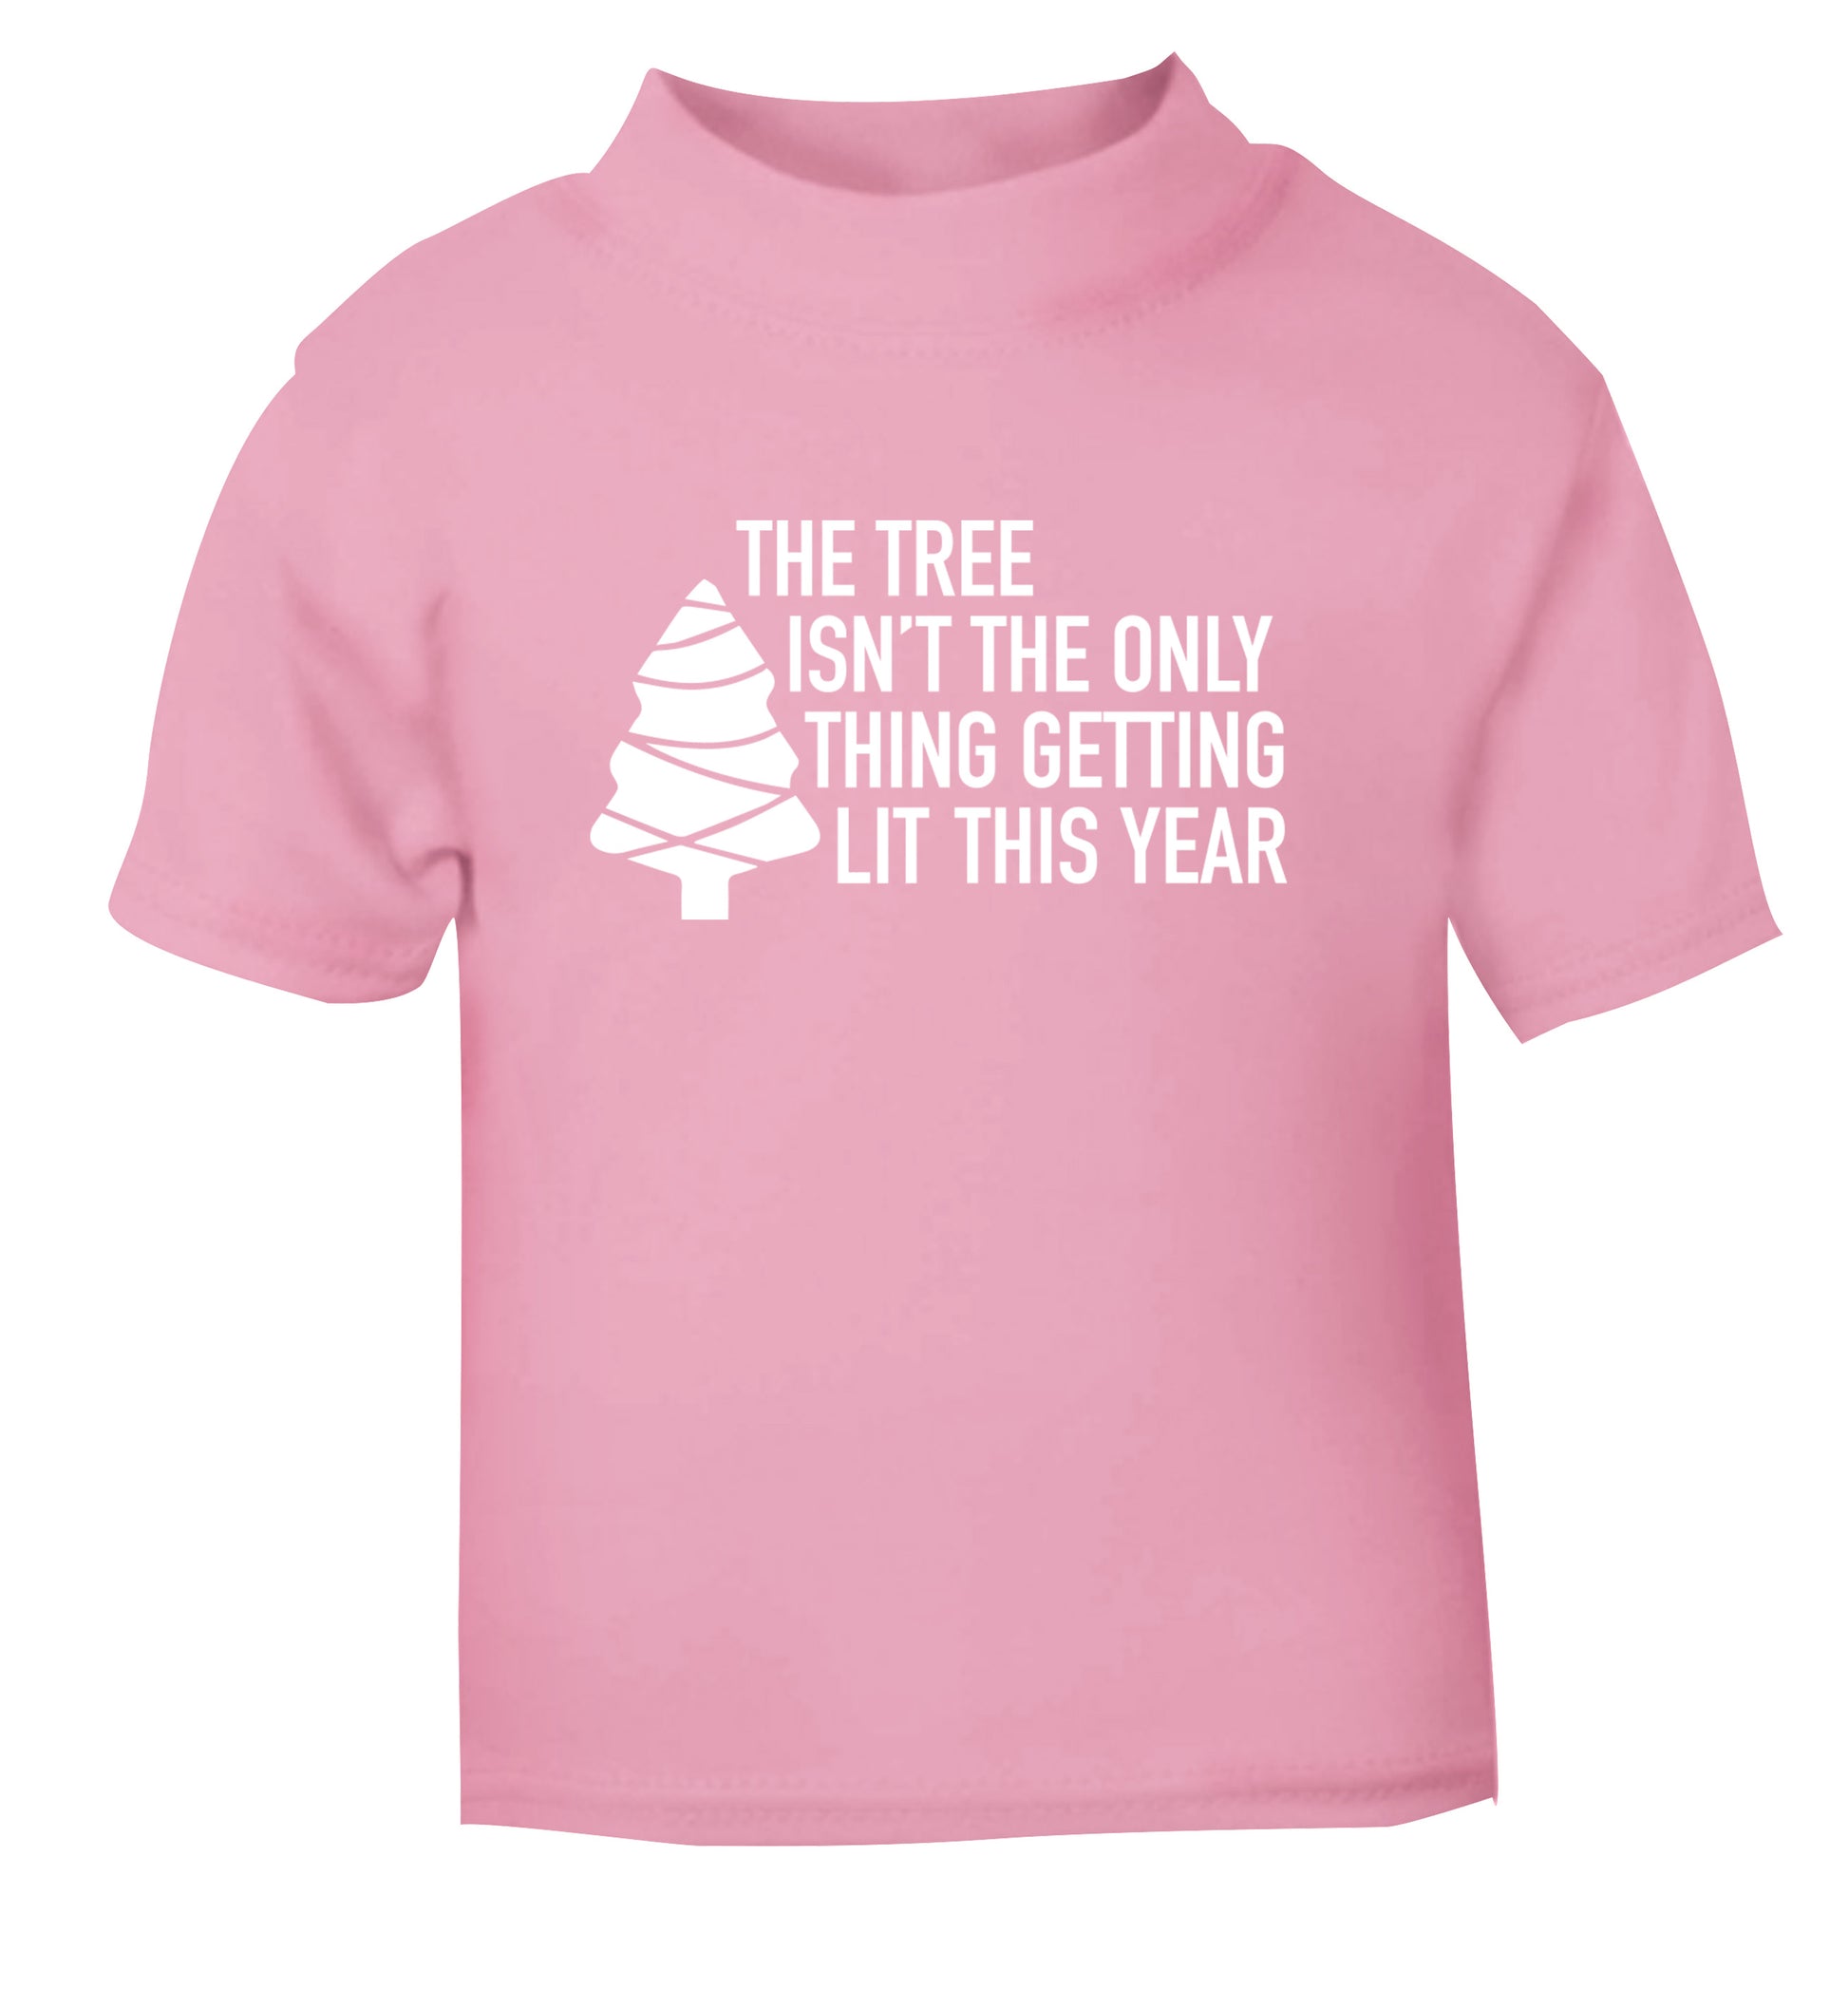 The tree isn't the only thing getting lit this year light pink Baby Toddler Tshirt 2 Years